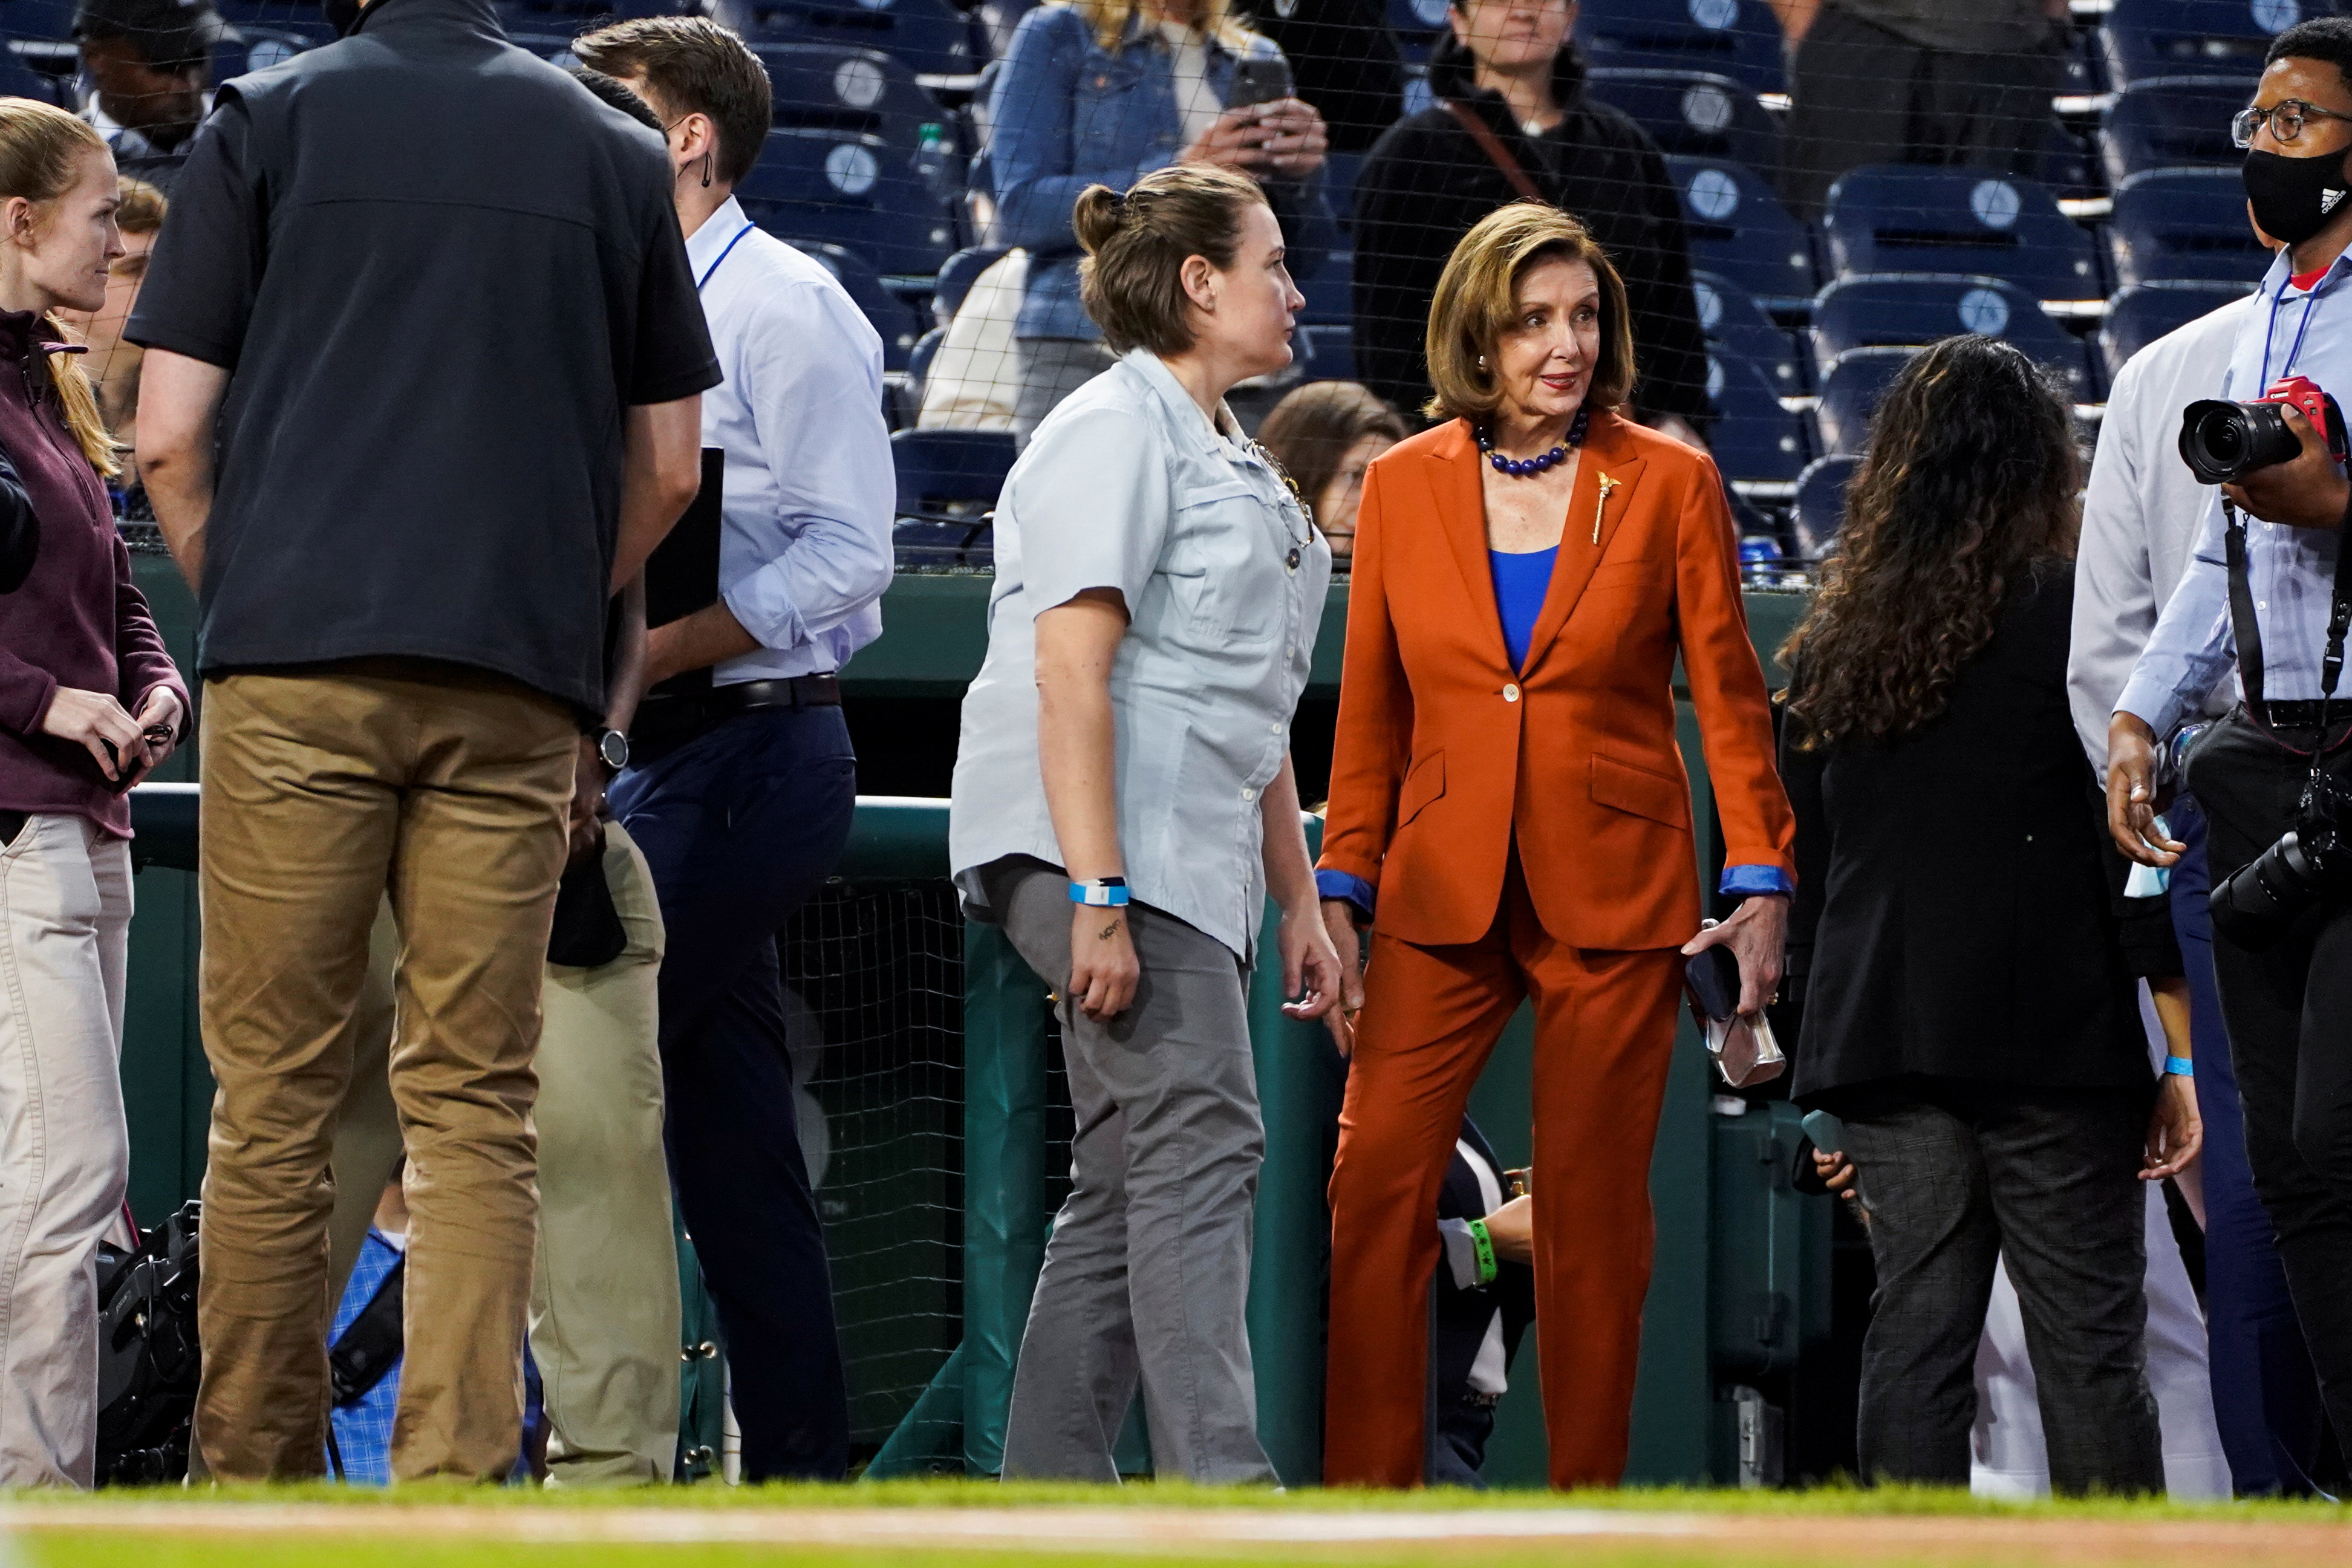 Republicans Win Third Straight Congressional Baseball Game for